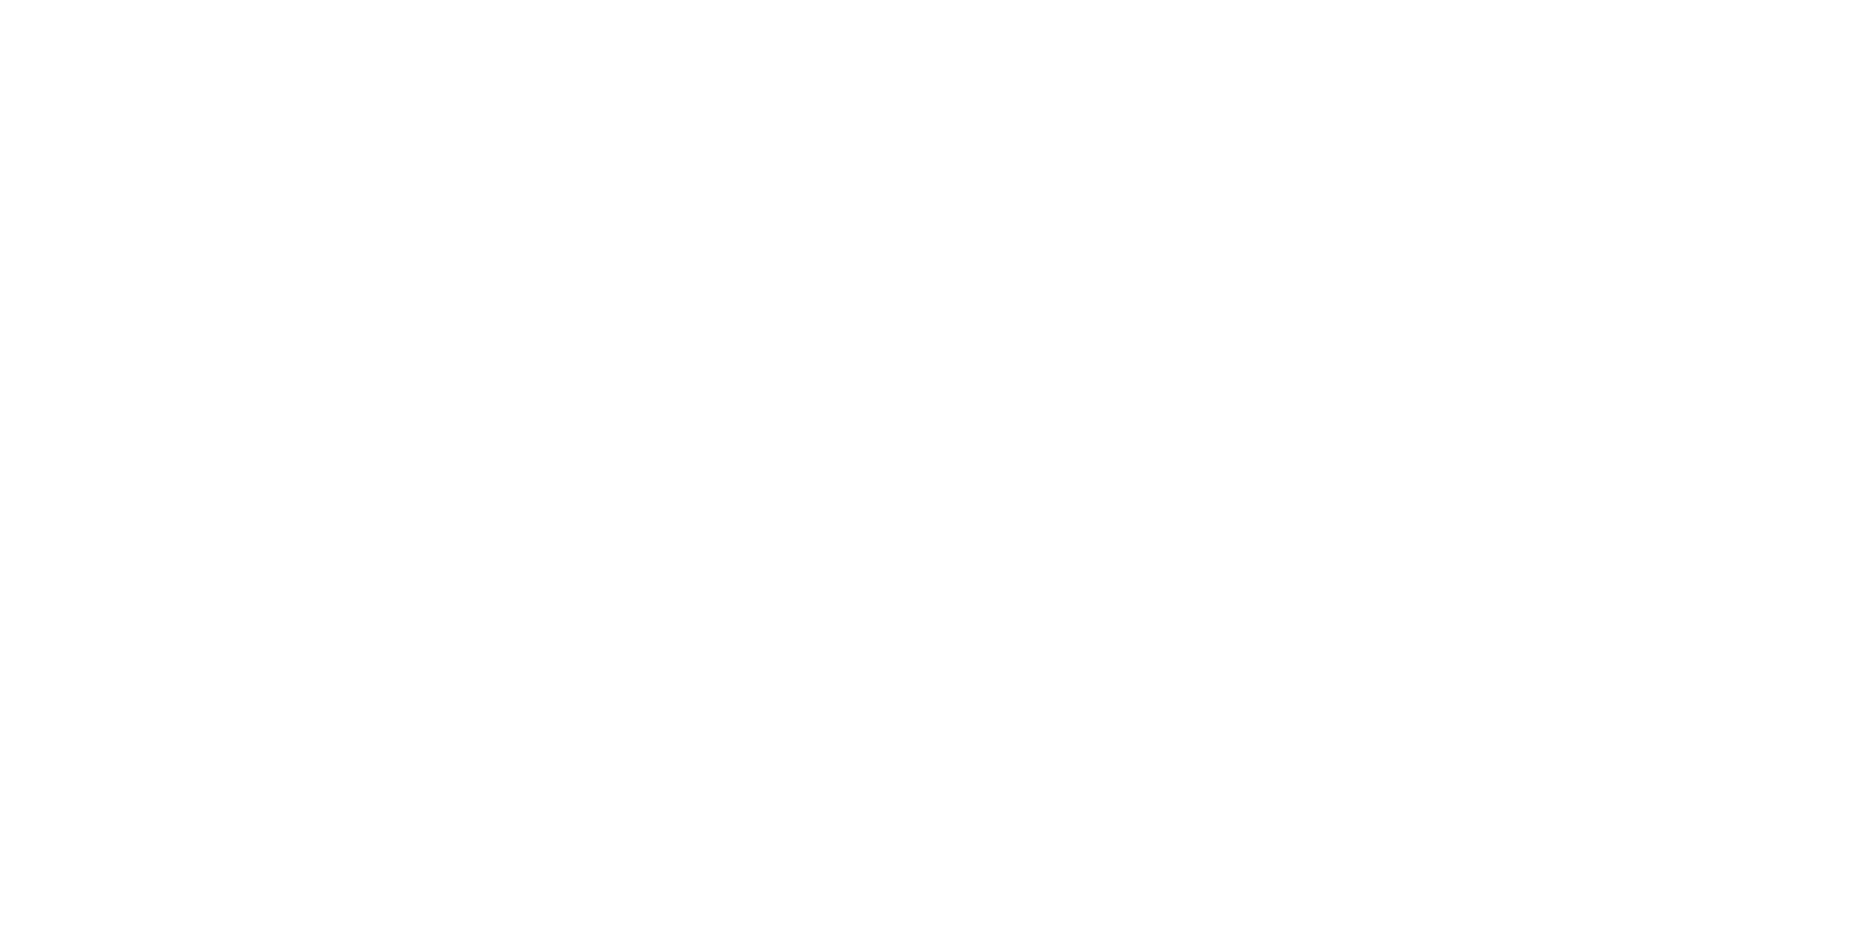 Be smart. Be troi.